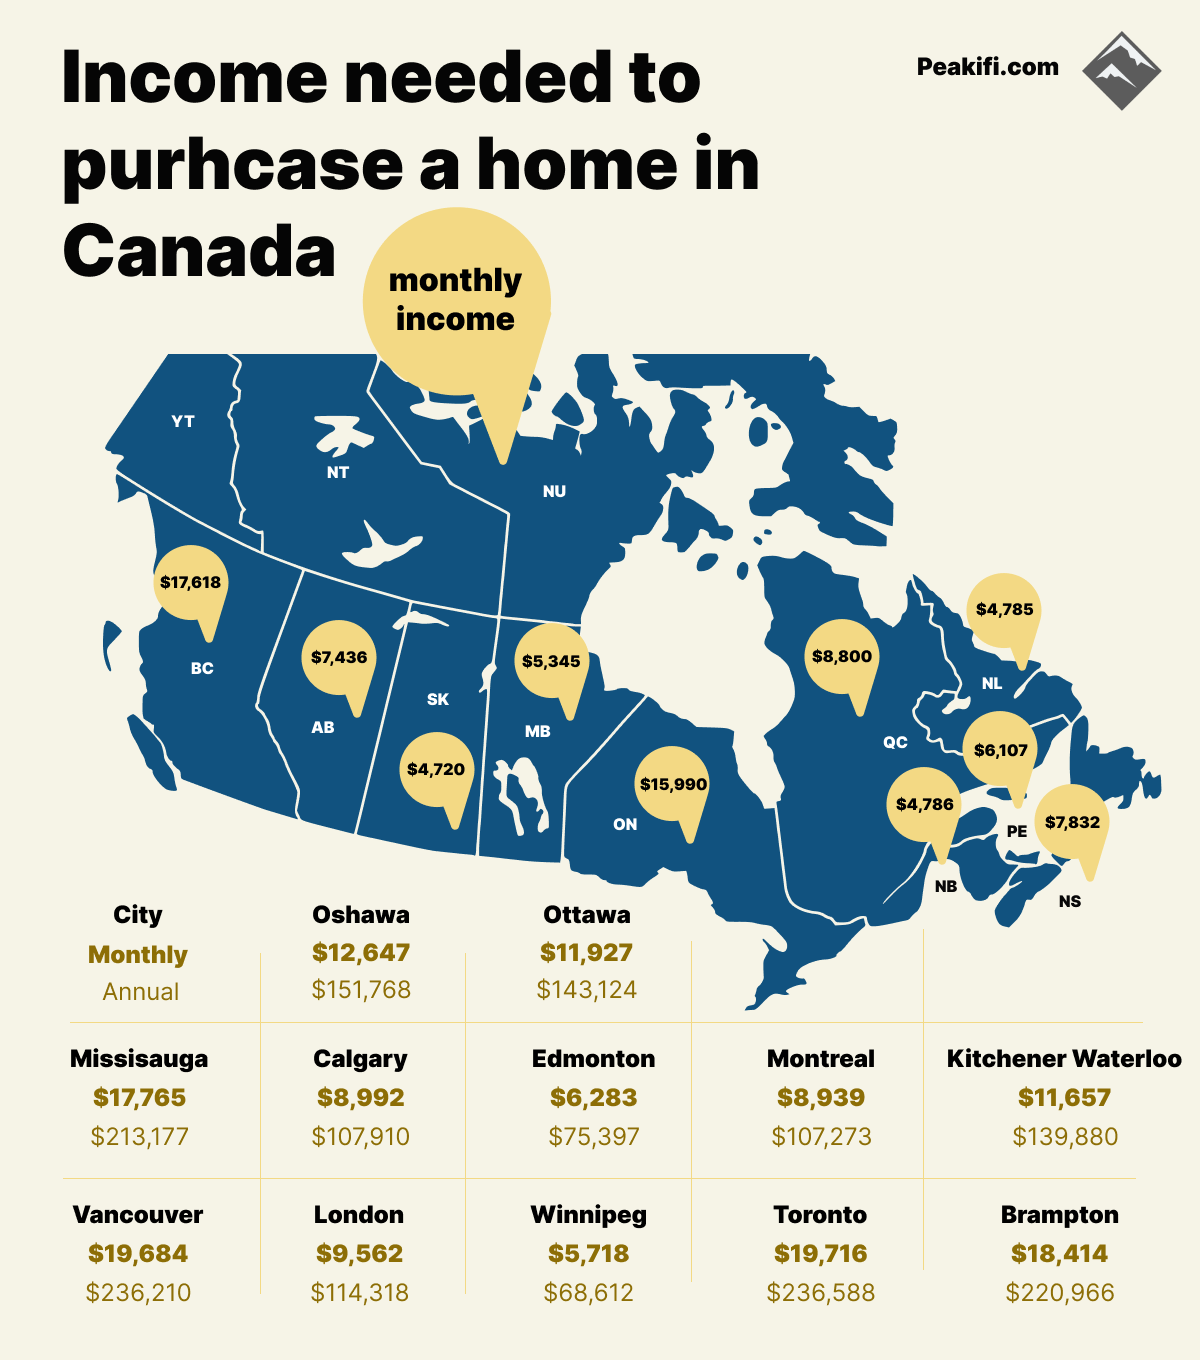 income to afford a home in Canada